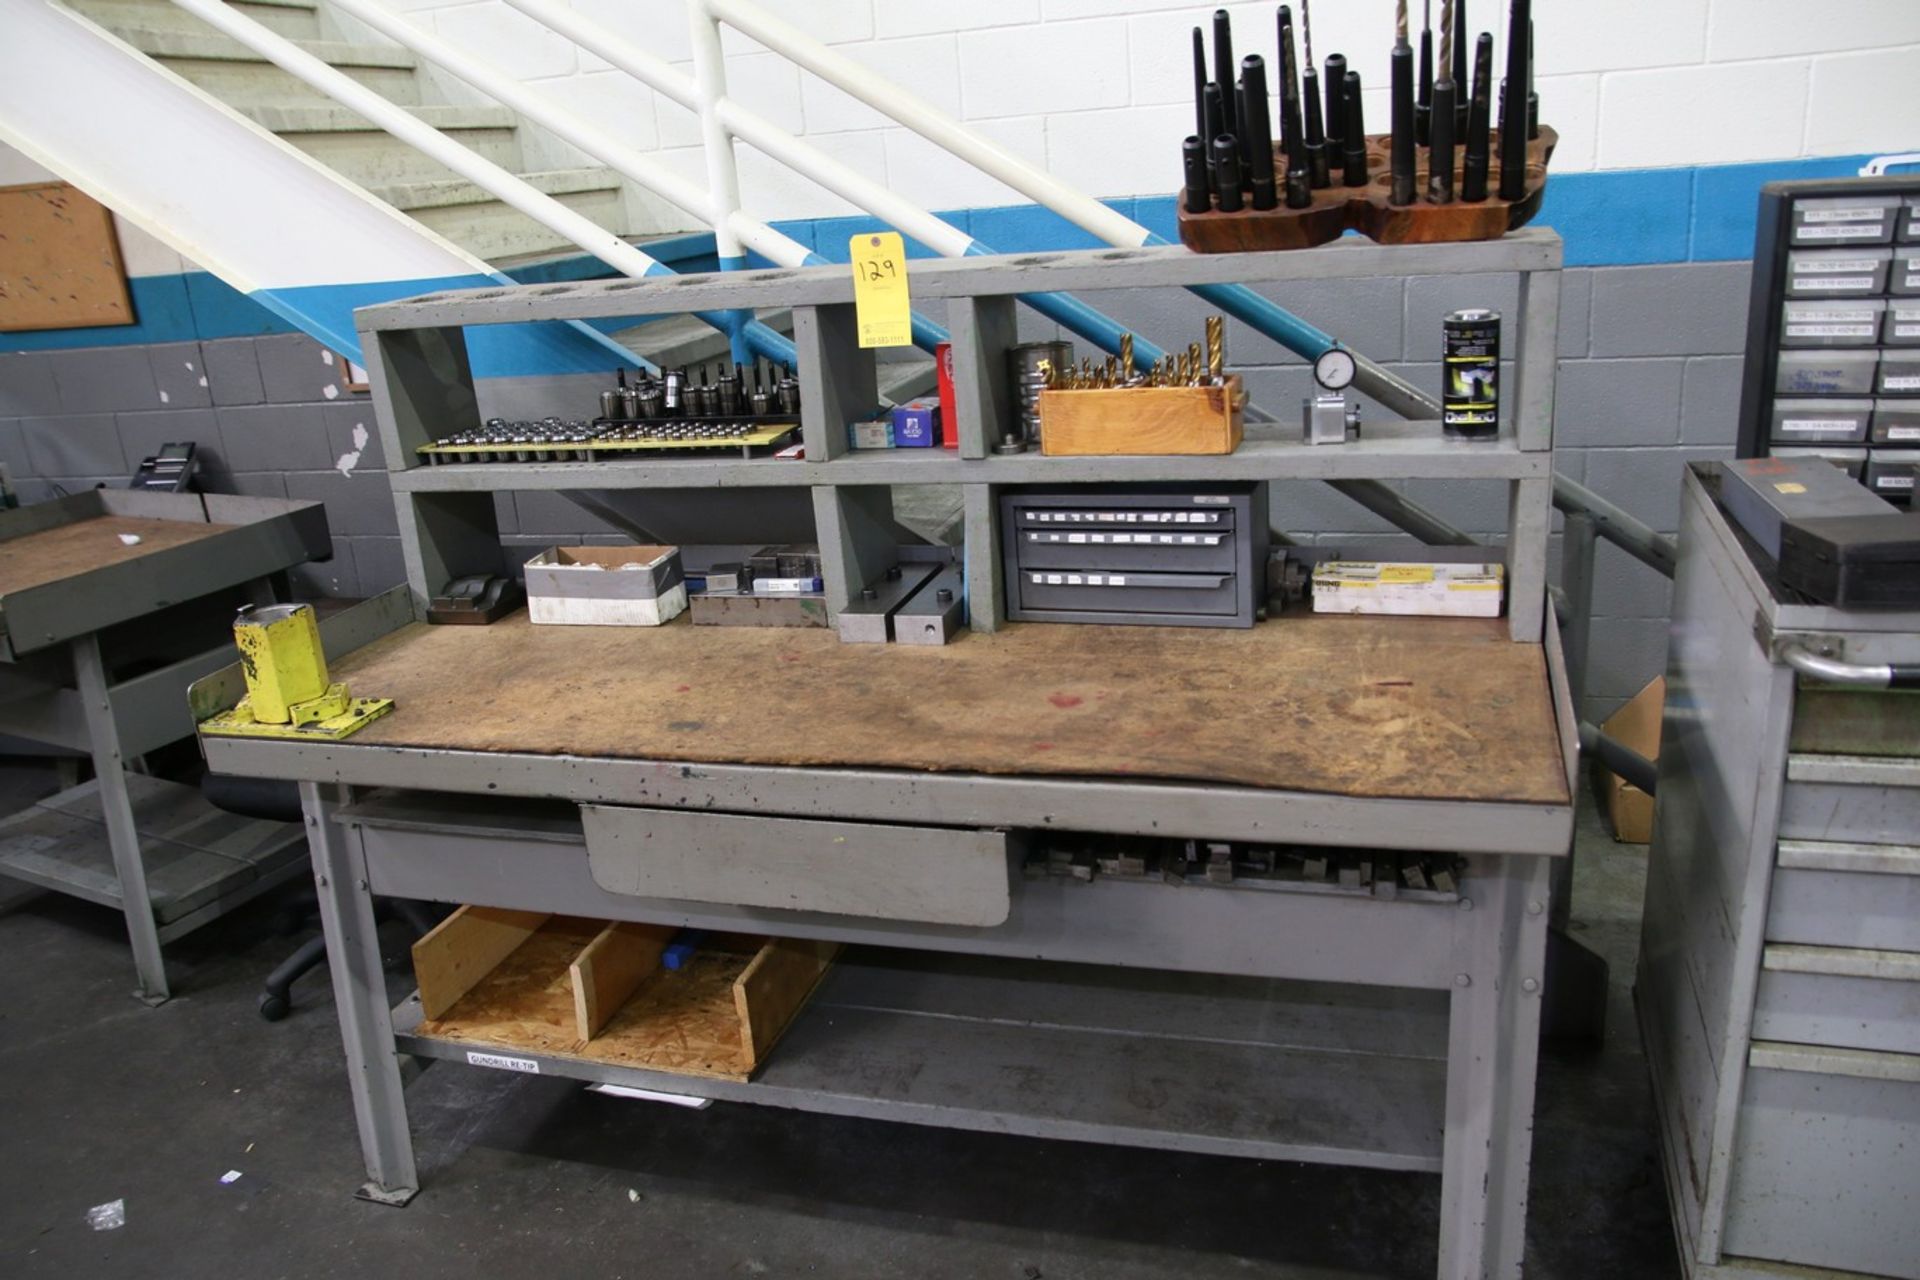 Steel Work Bench with Contents Contents Include Collets, Drill Bodies, Drills, Reamers and Misc.